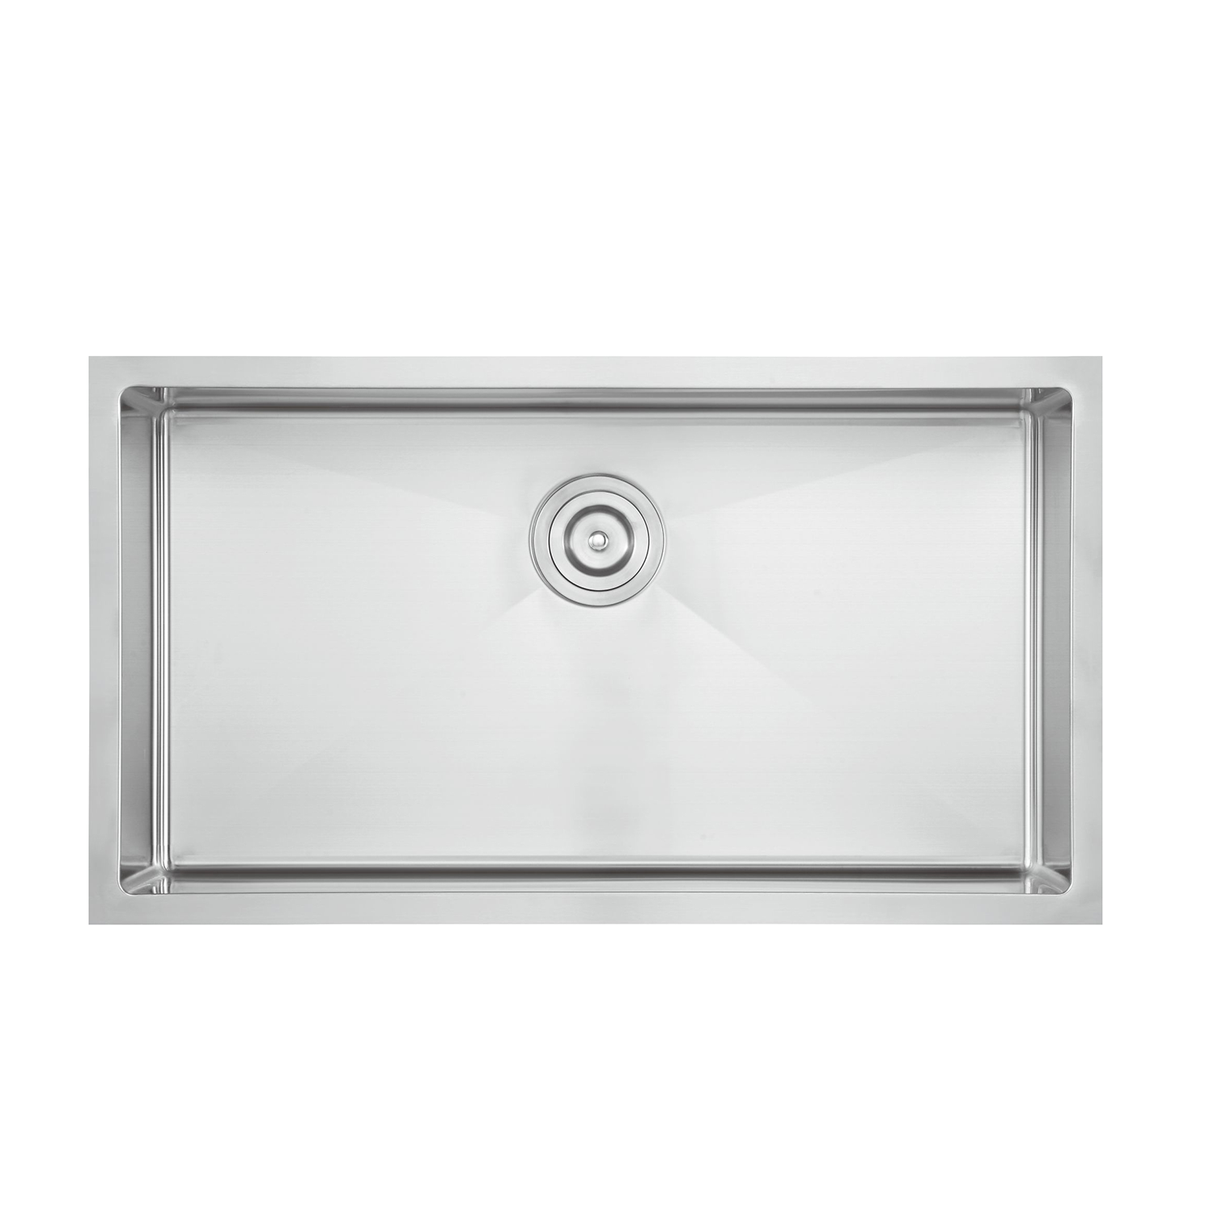 DAX Stainless Steel Single Bowl Undermount Kitchen Sink, 32", Brushed Stainless Steel DAX-T3318-R10